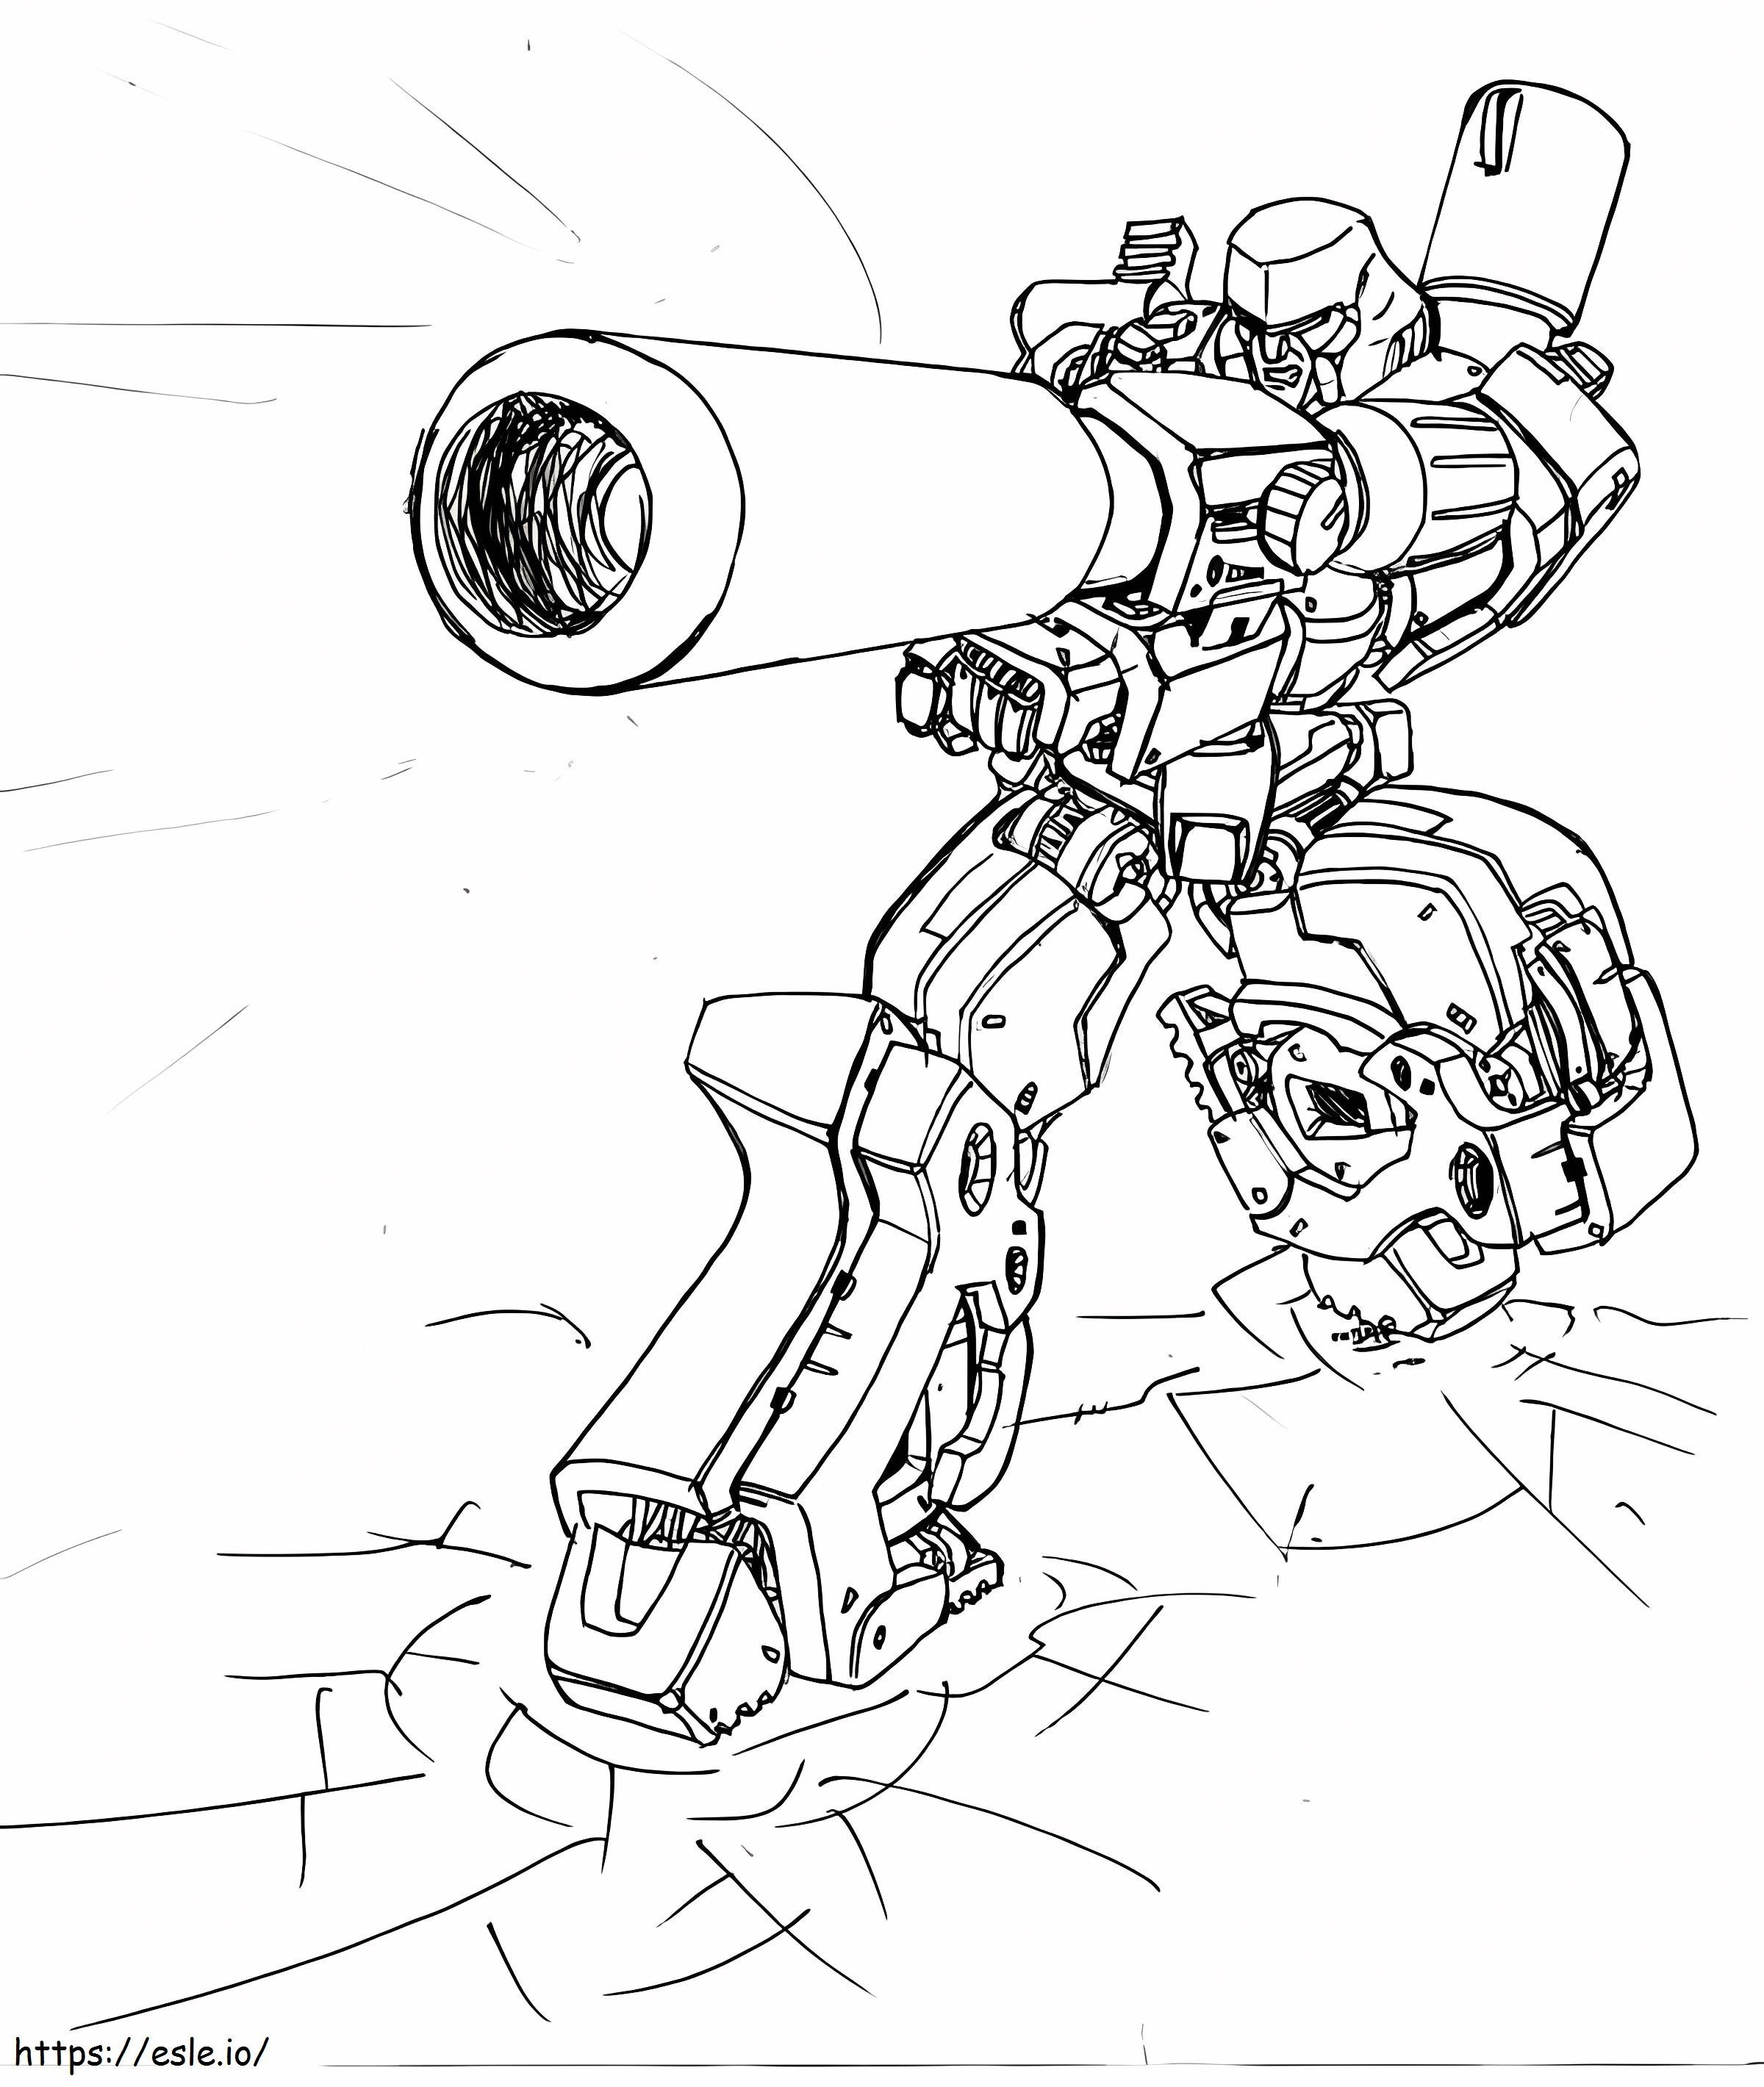 Megatron And Big Cannon coloring page